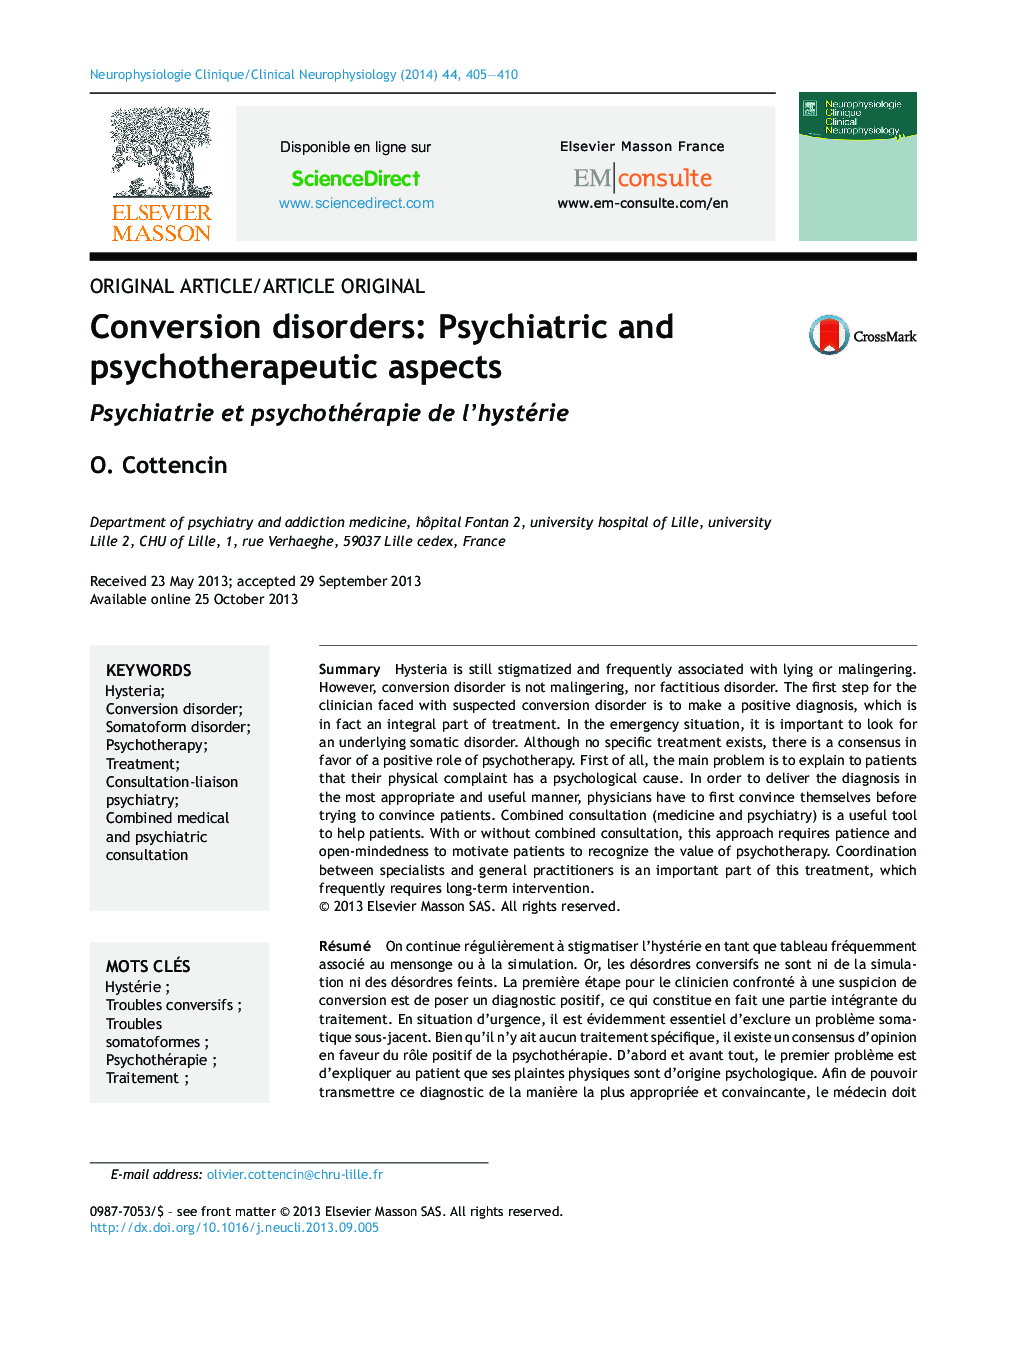 Conversion disorders: Psychiatric and psychotherapeutic aspects